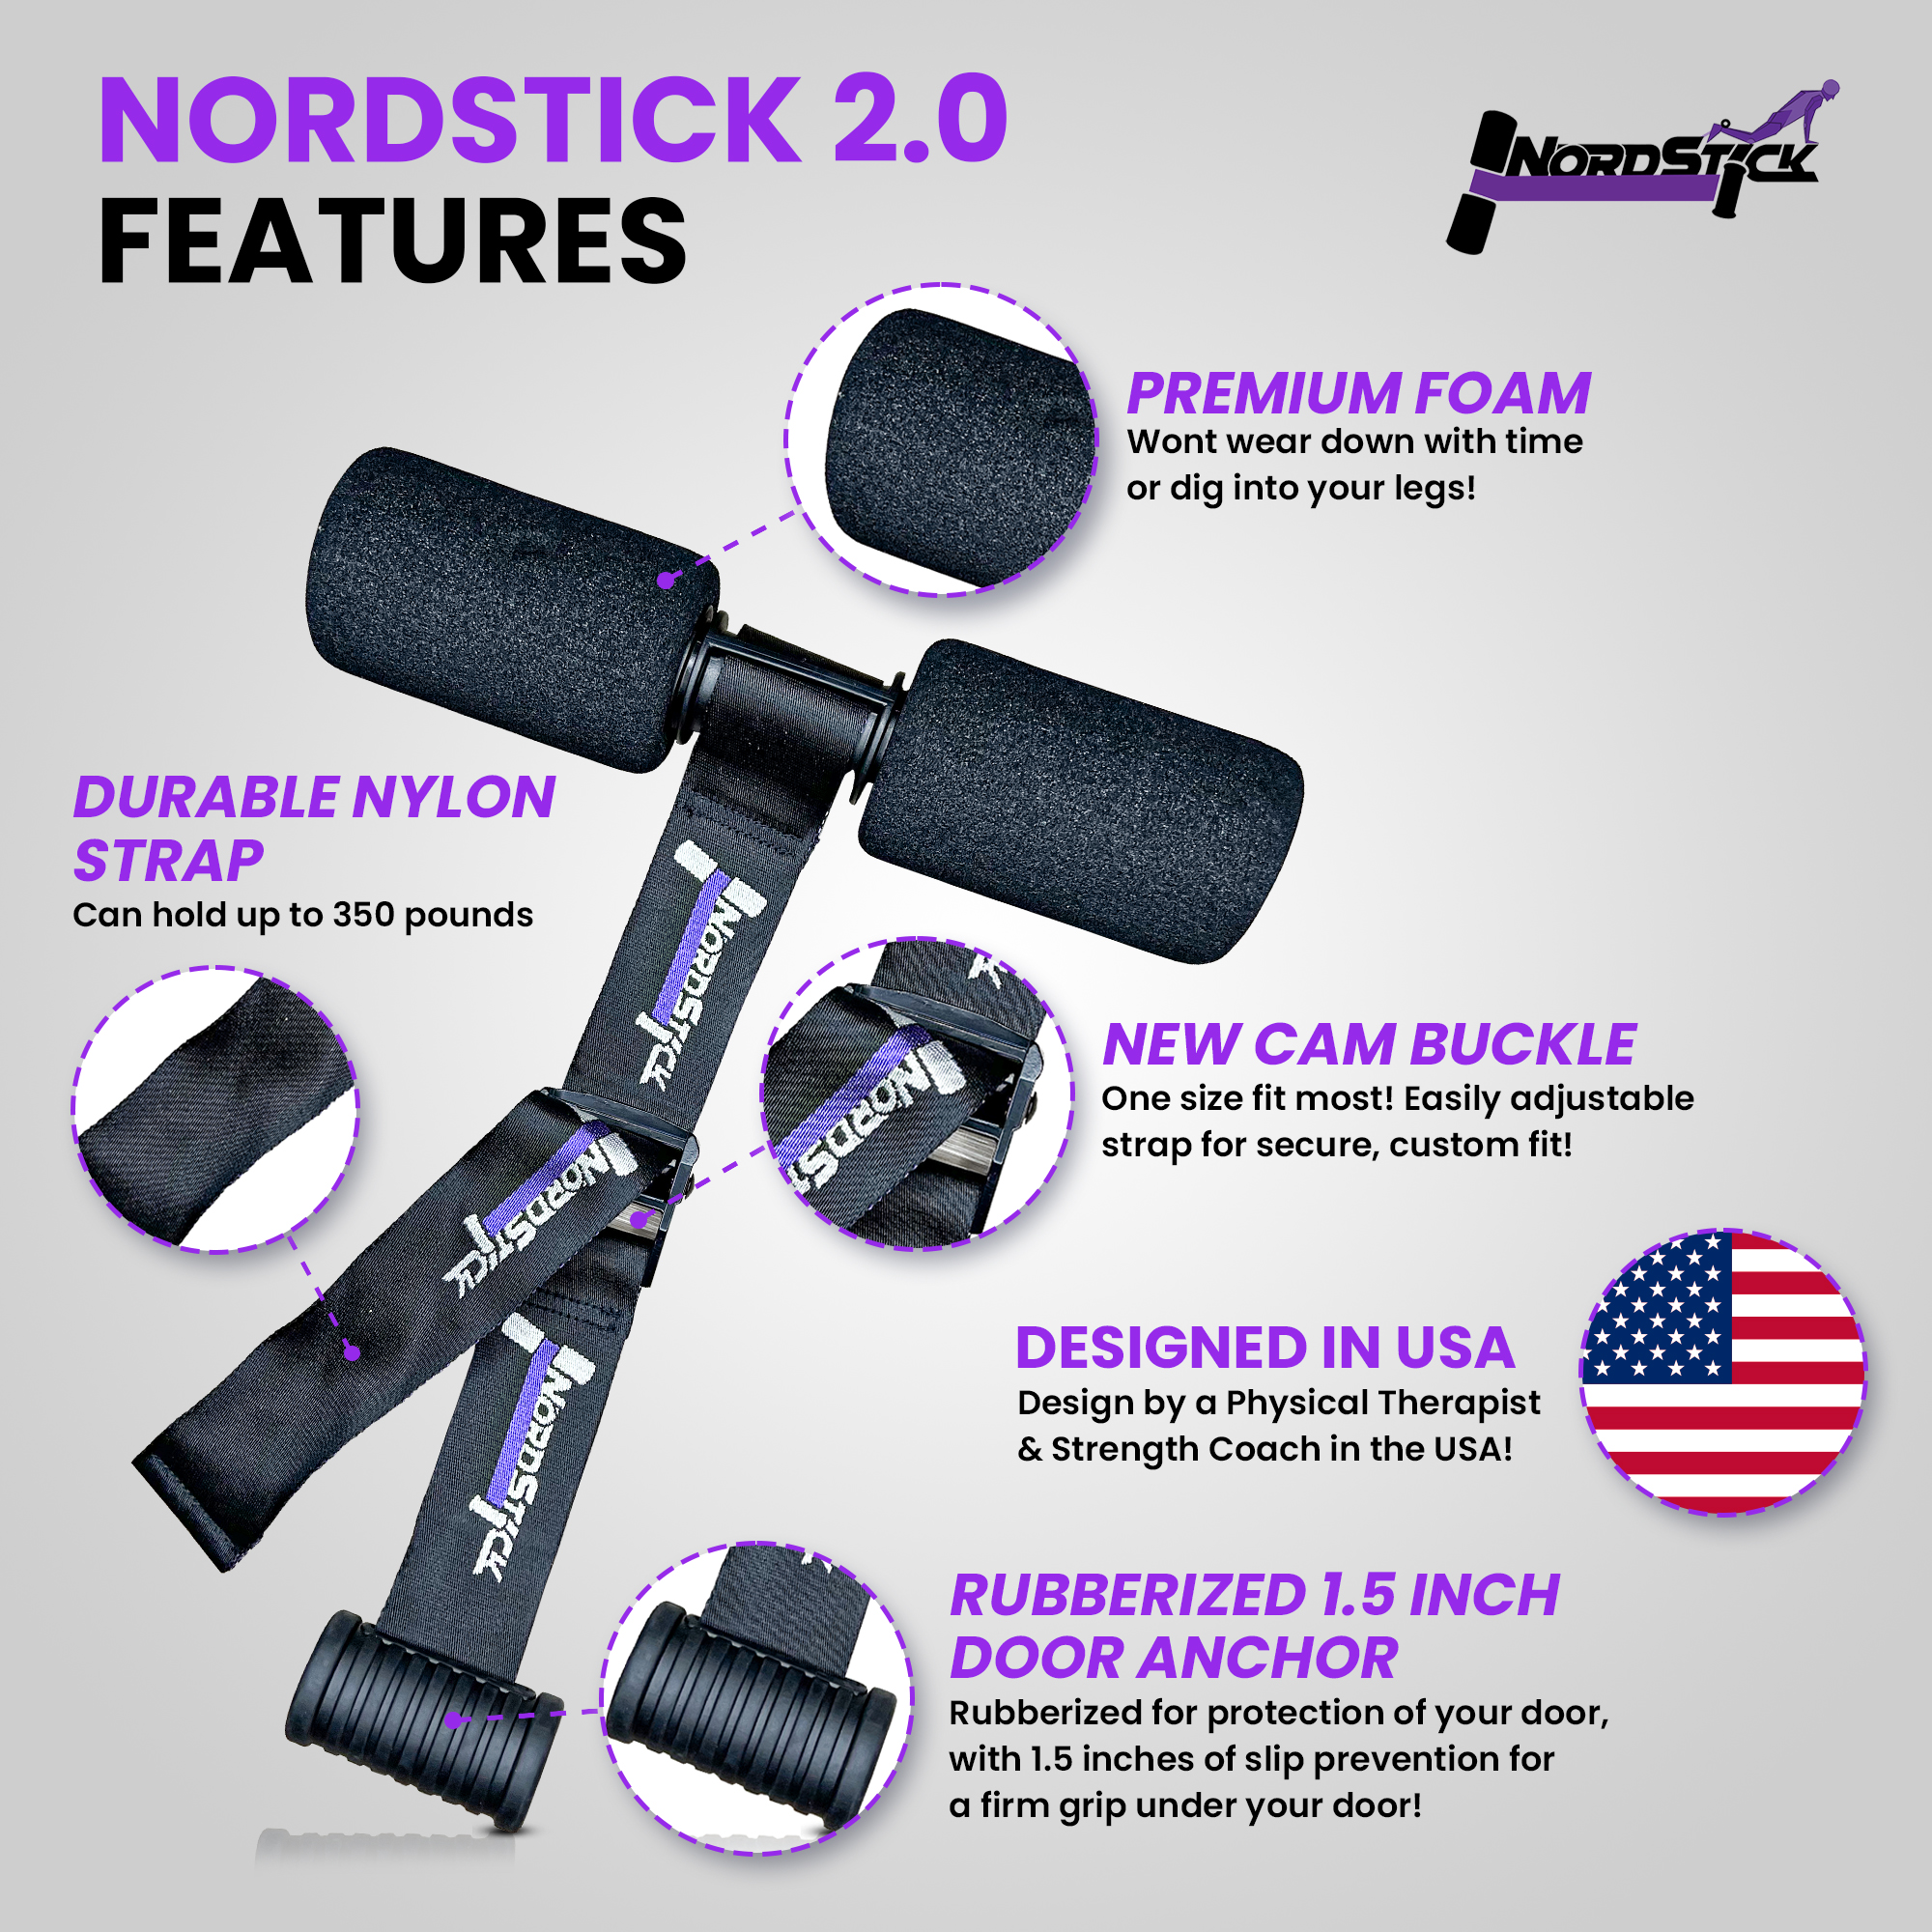 Make the most of body weight workouts at home with the Nordstick!